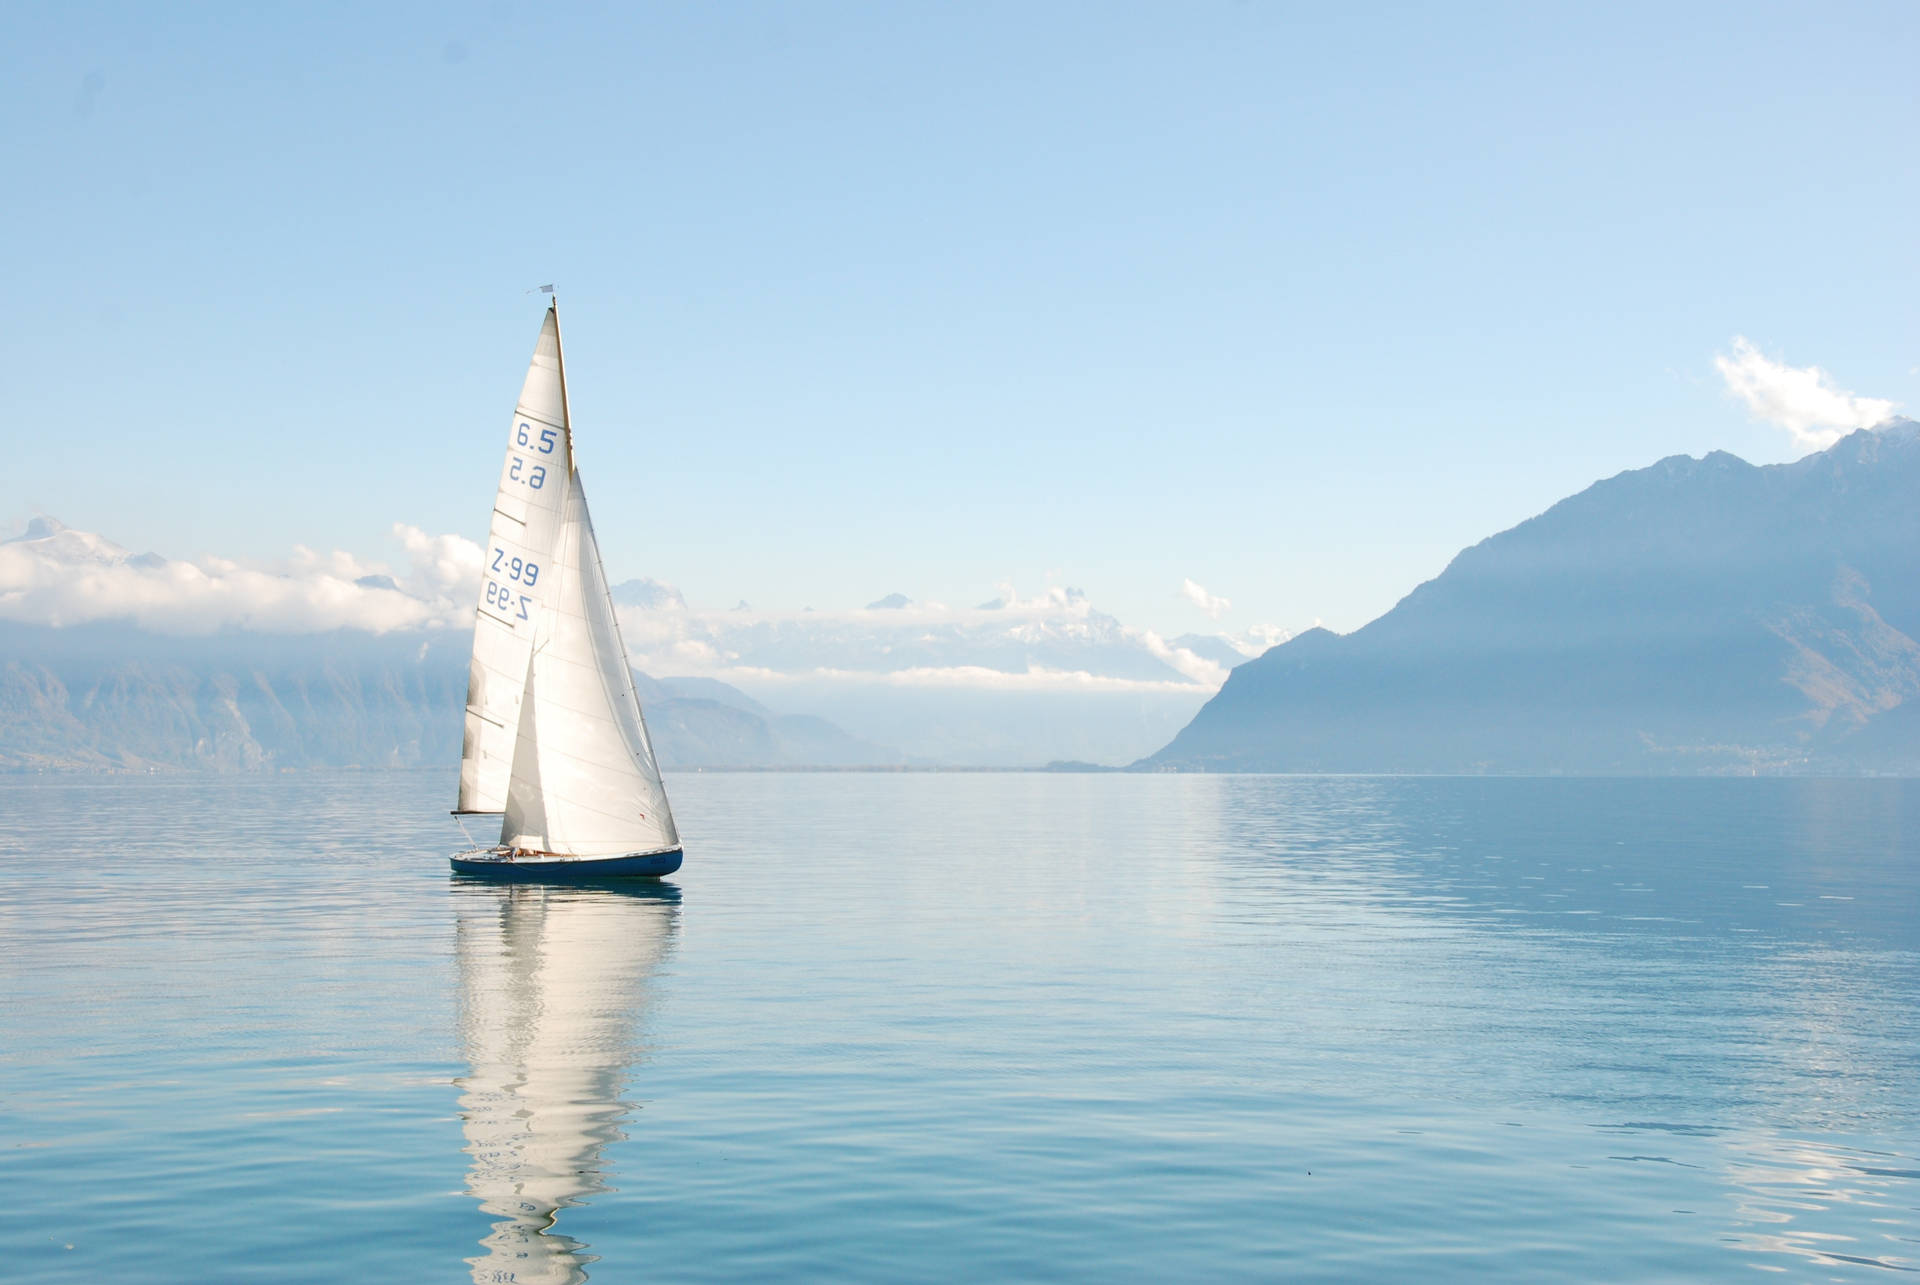 Tranquil Moment of a Yacht Sailing in the Emerald Sea Wallpaper